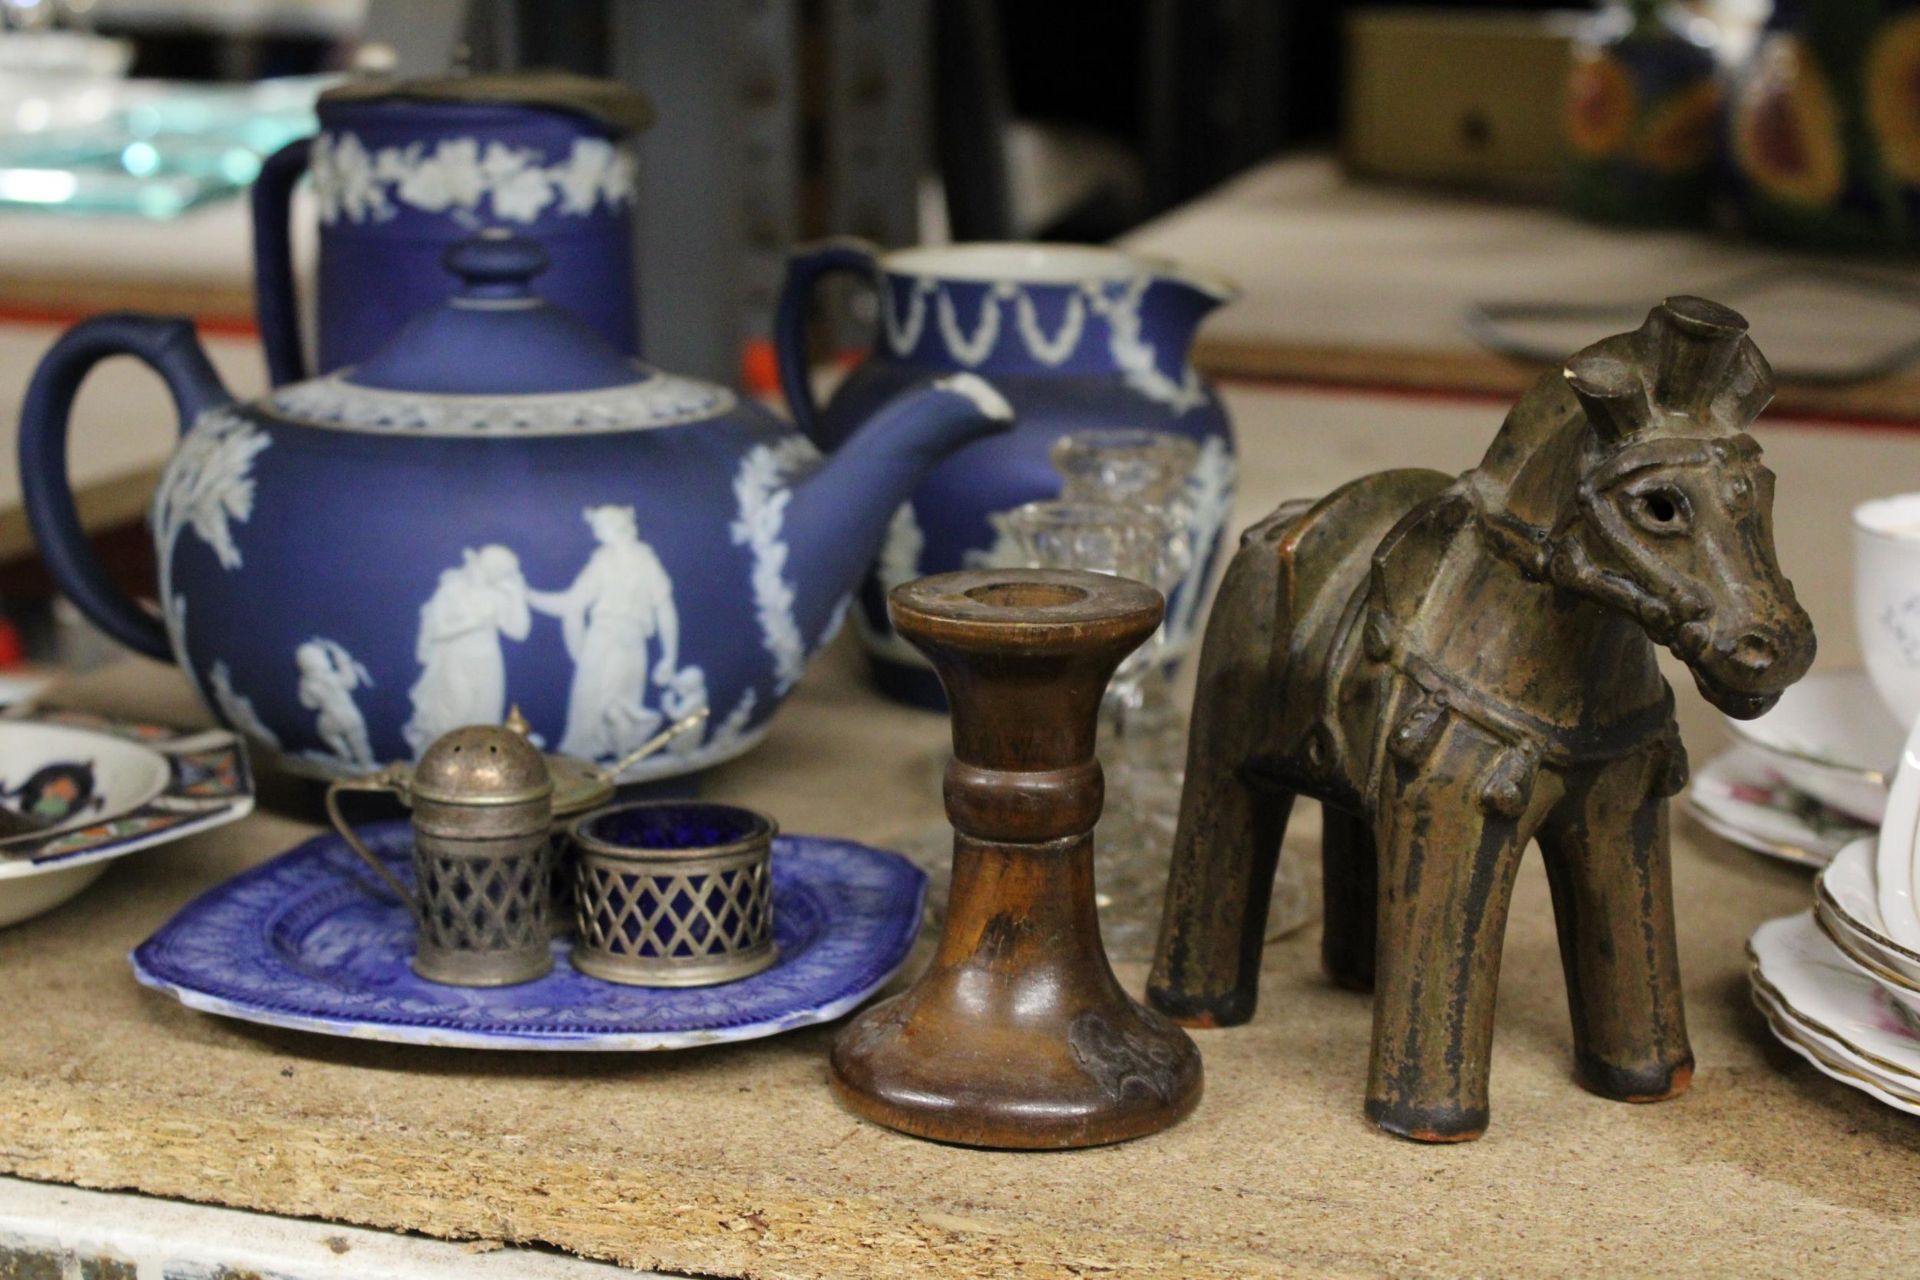 THREE PIECES OF DARK BLUE WEDGWOOD JASPERWARE TO INCLUDE A TEAPOT, PEWTER LIDDED JUG AND MILK JUG, - Image 3 of 6